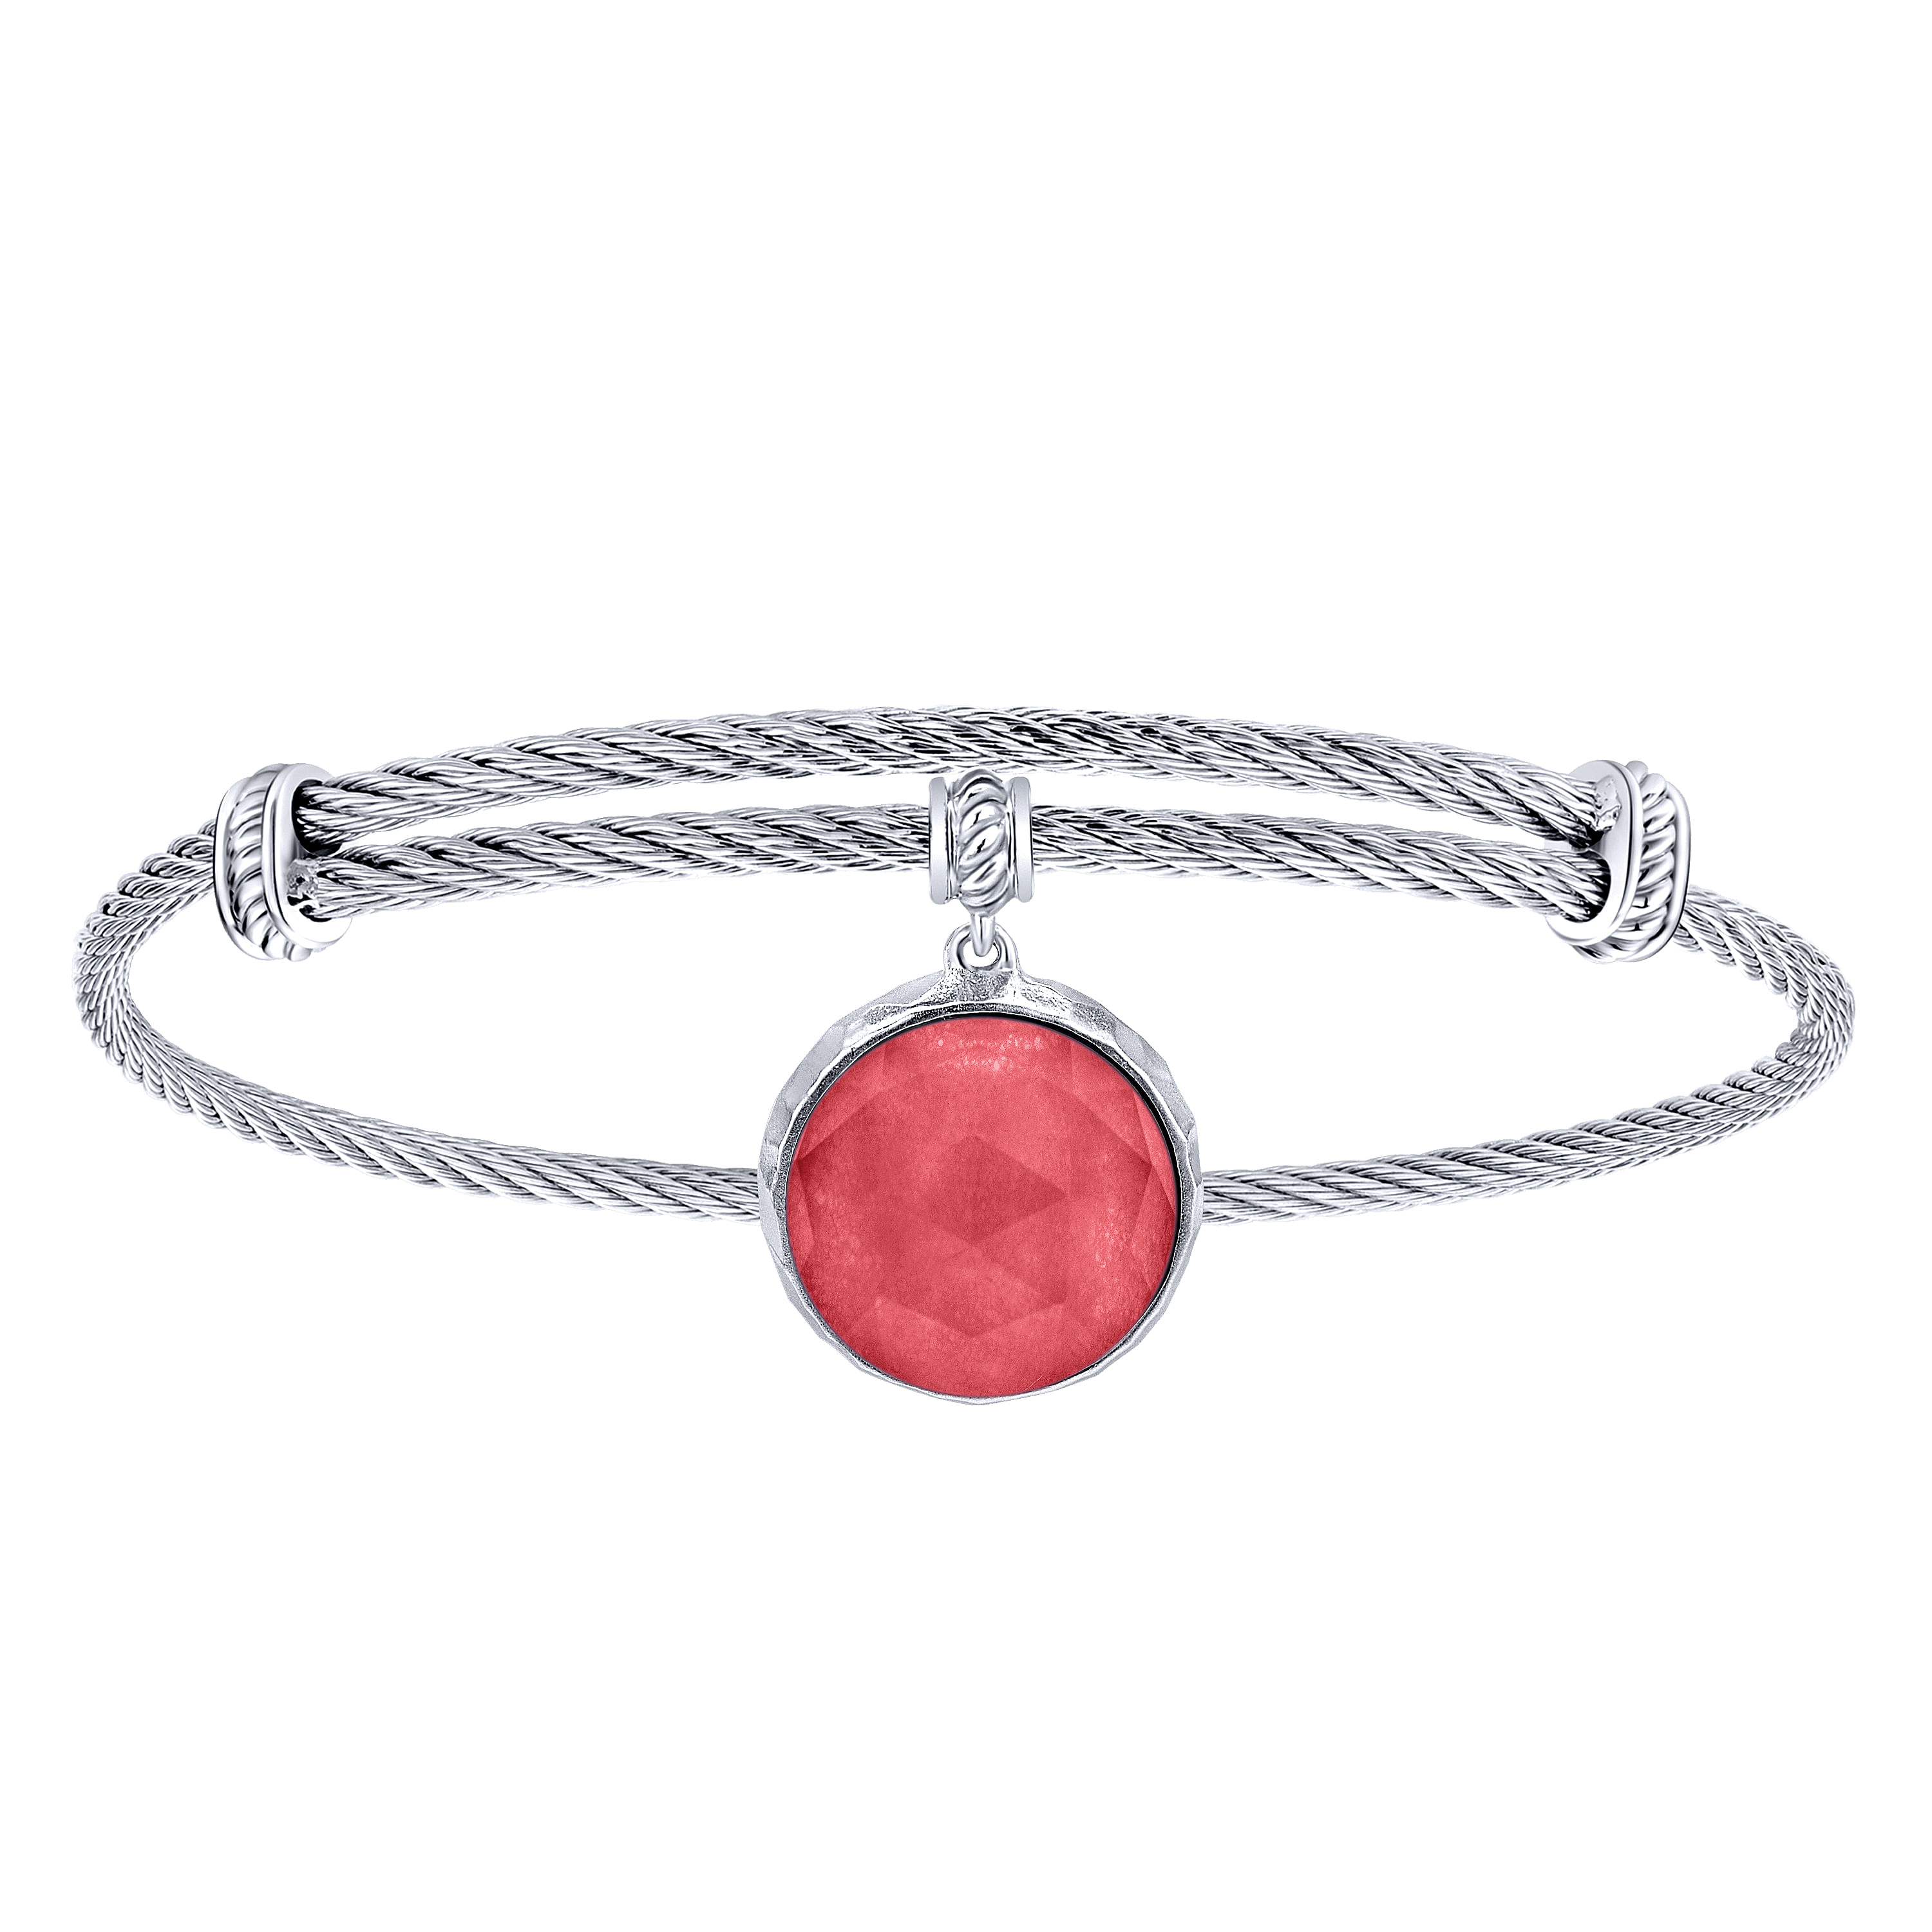 Adjustable Twisted Cable Stainless Steel Bangle with Round Sterling Silver Rock Crystal/Red Jade Charm